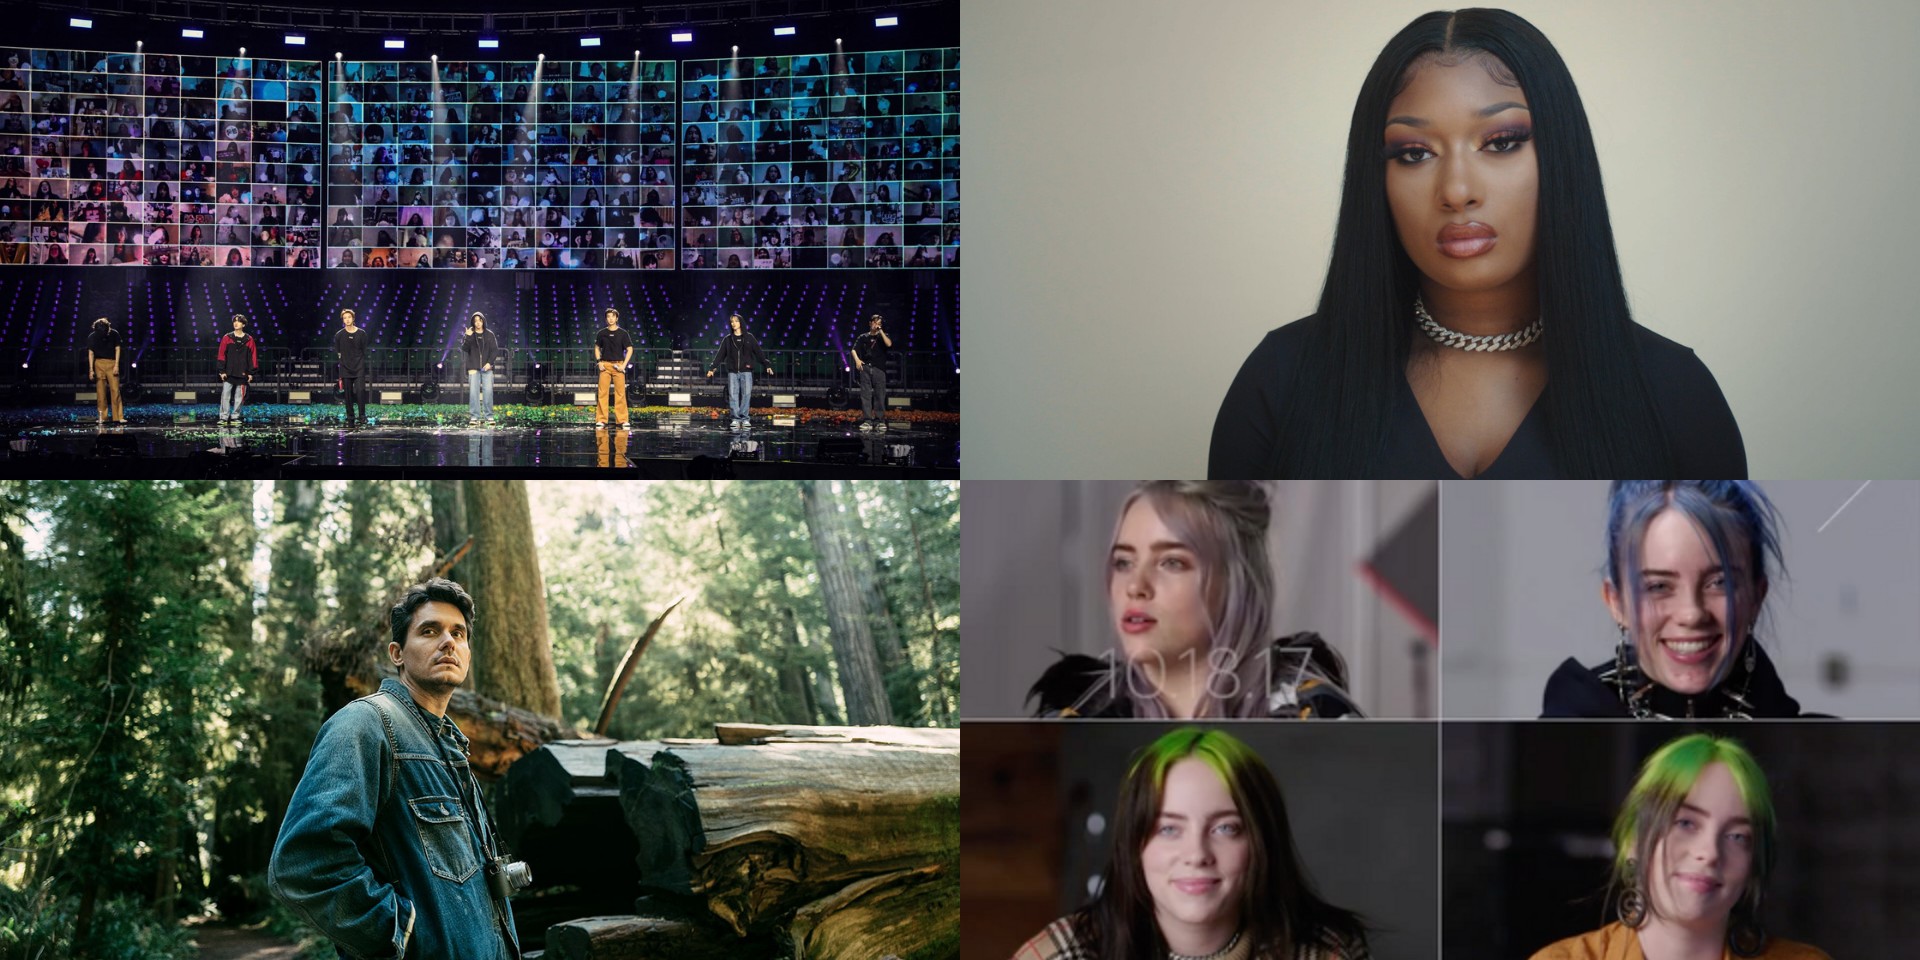 Billie Eilish, BTS, John Mayer, Megan Thee Stallion, and more are nominated at the 25th Webby Awards